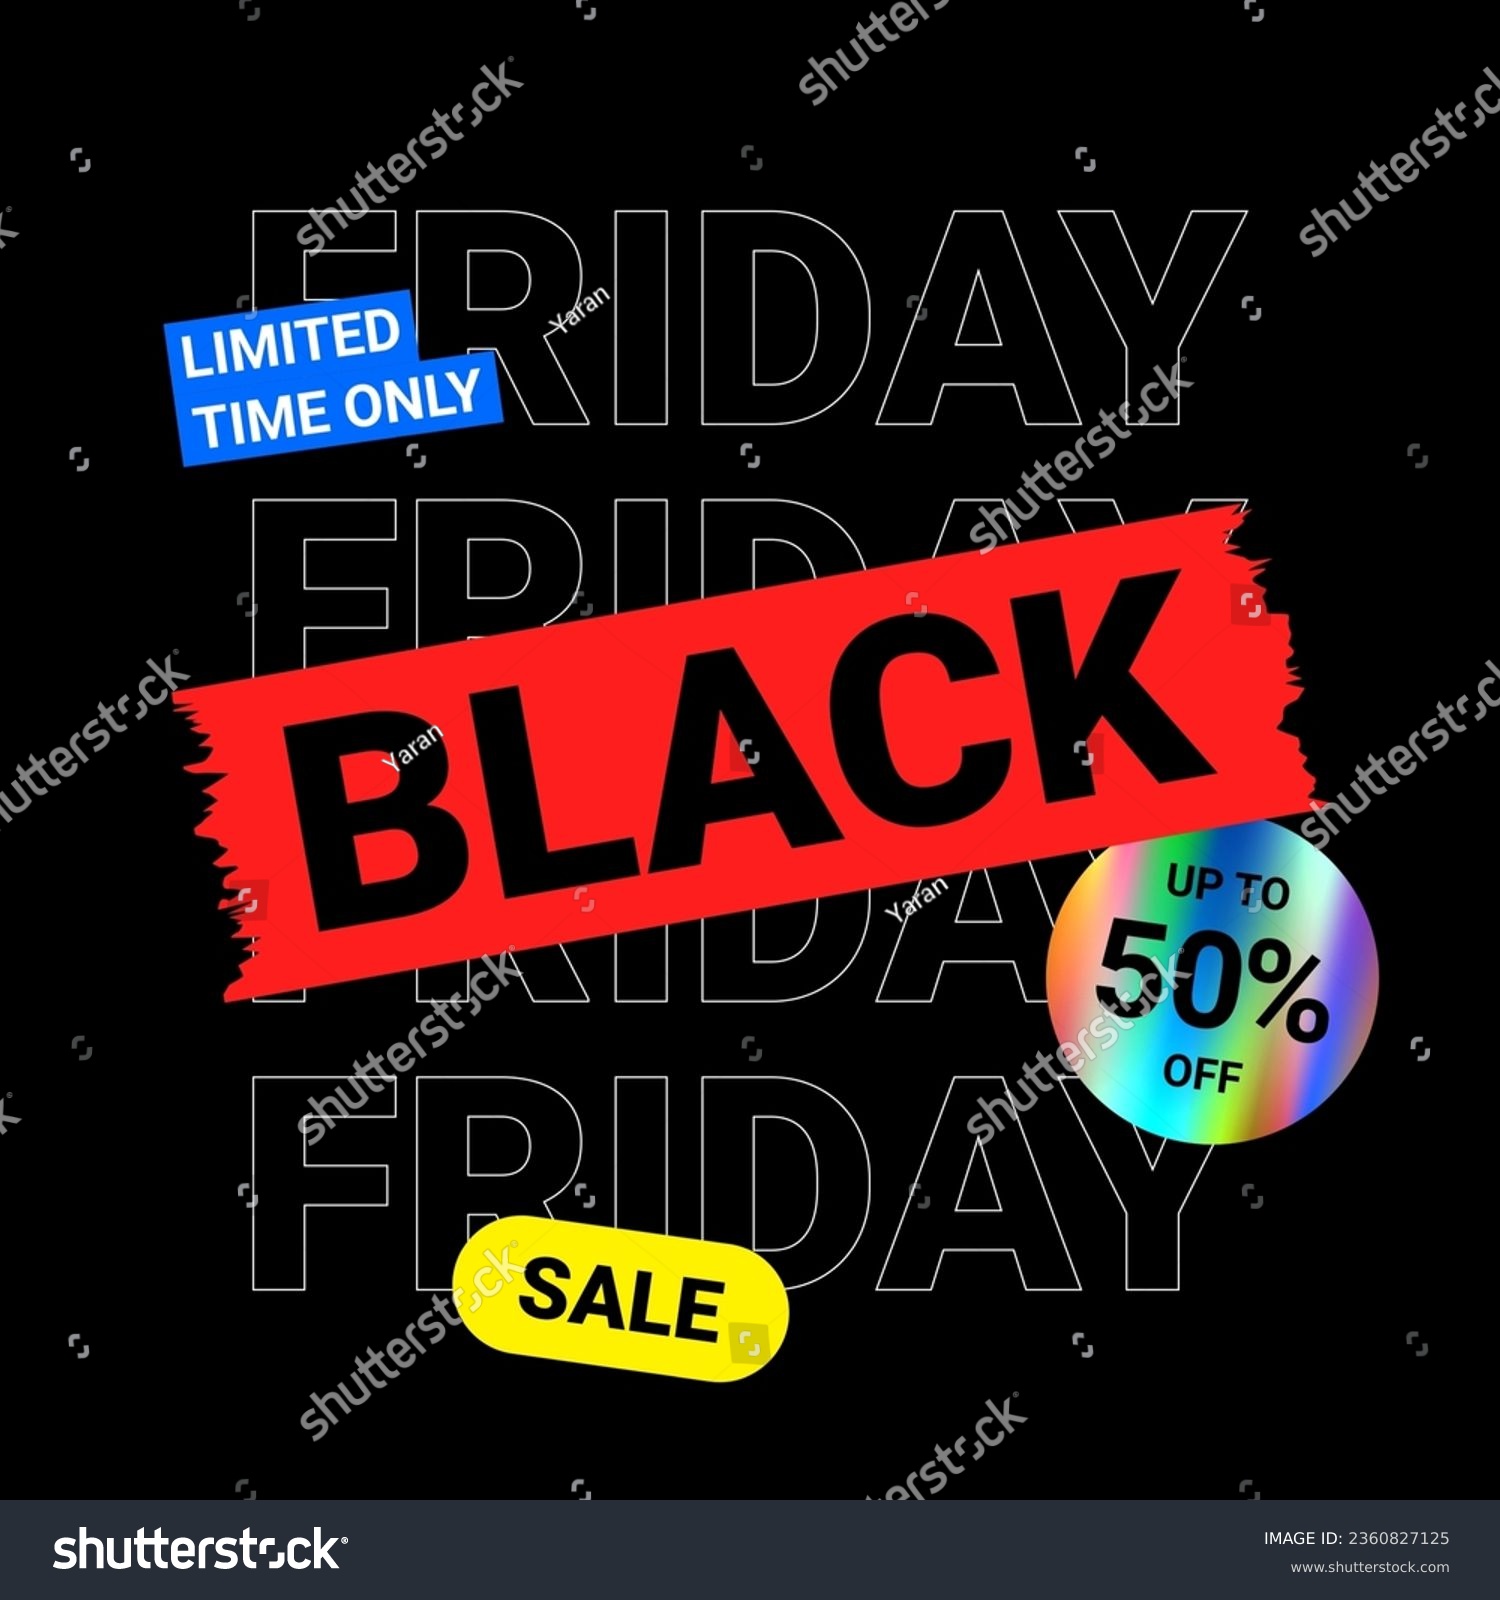 Typography banner for Black Friday. Modern linear text symbol of Black Friday with holographic sticker and discount offer. Design template for Black Friday sale, advertising and social media. #2360827125